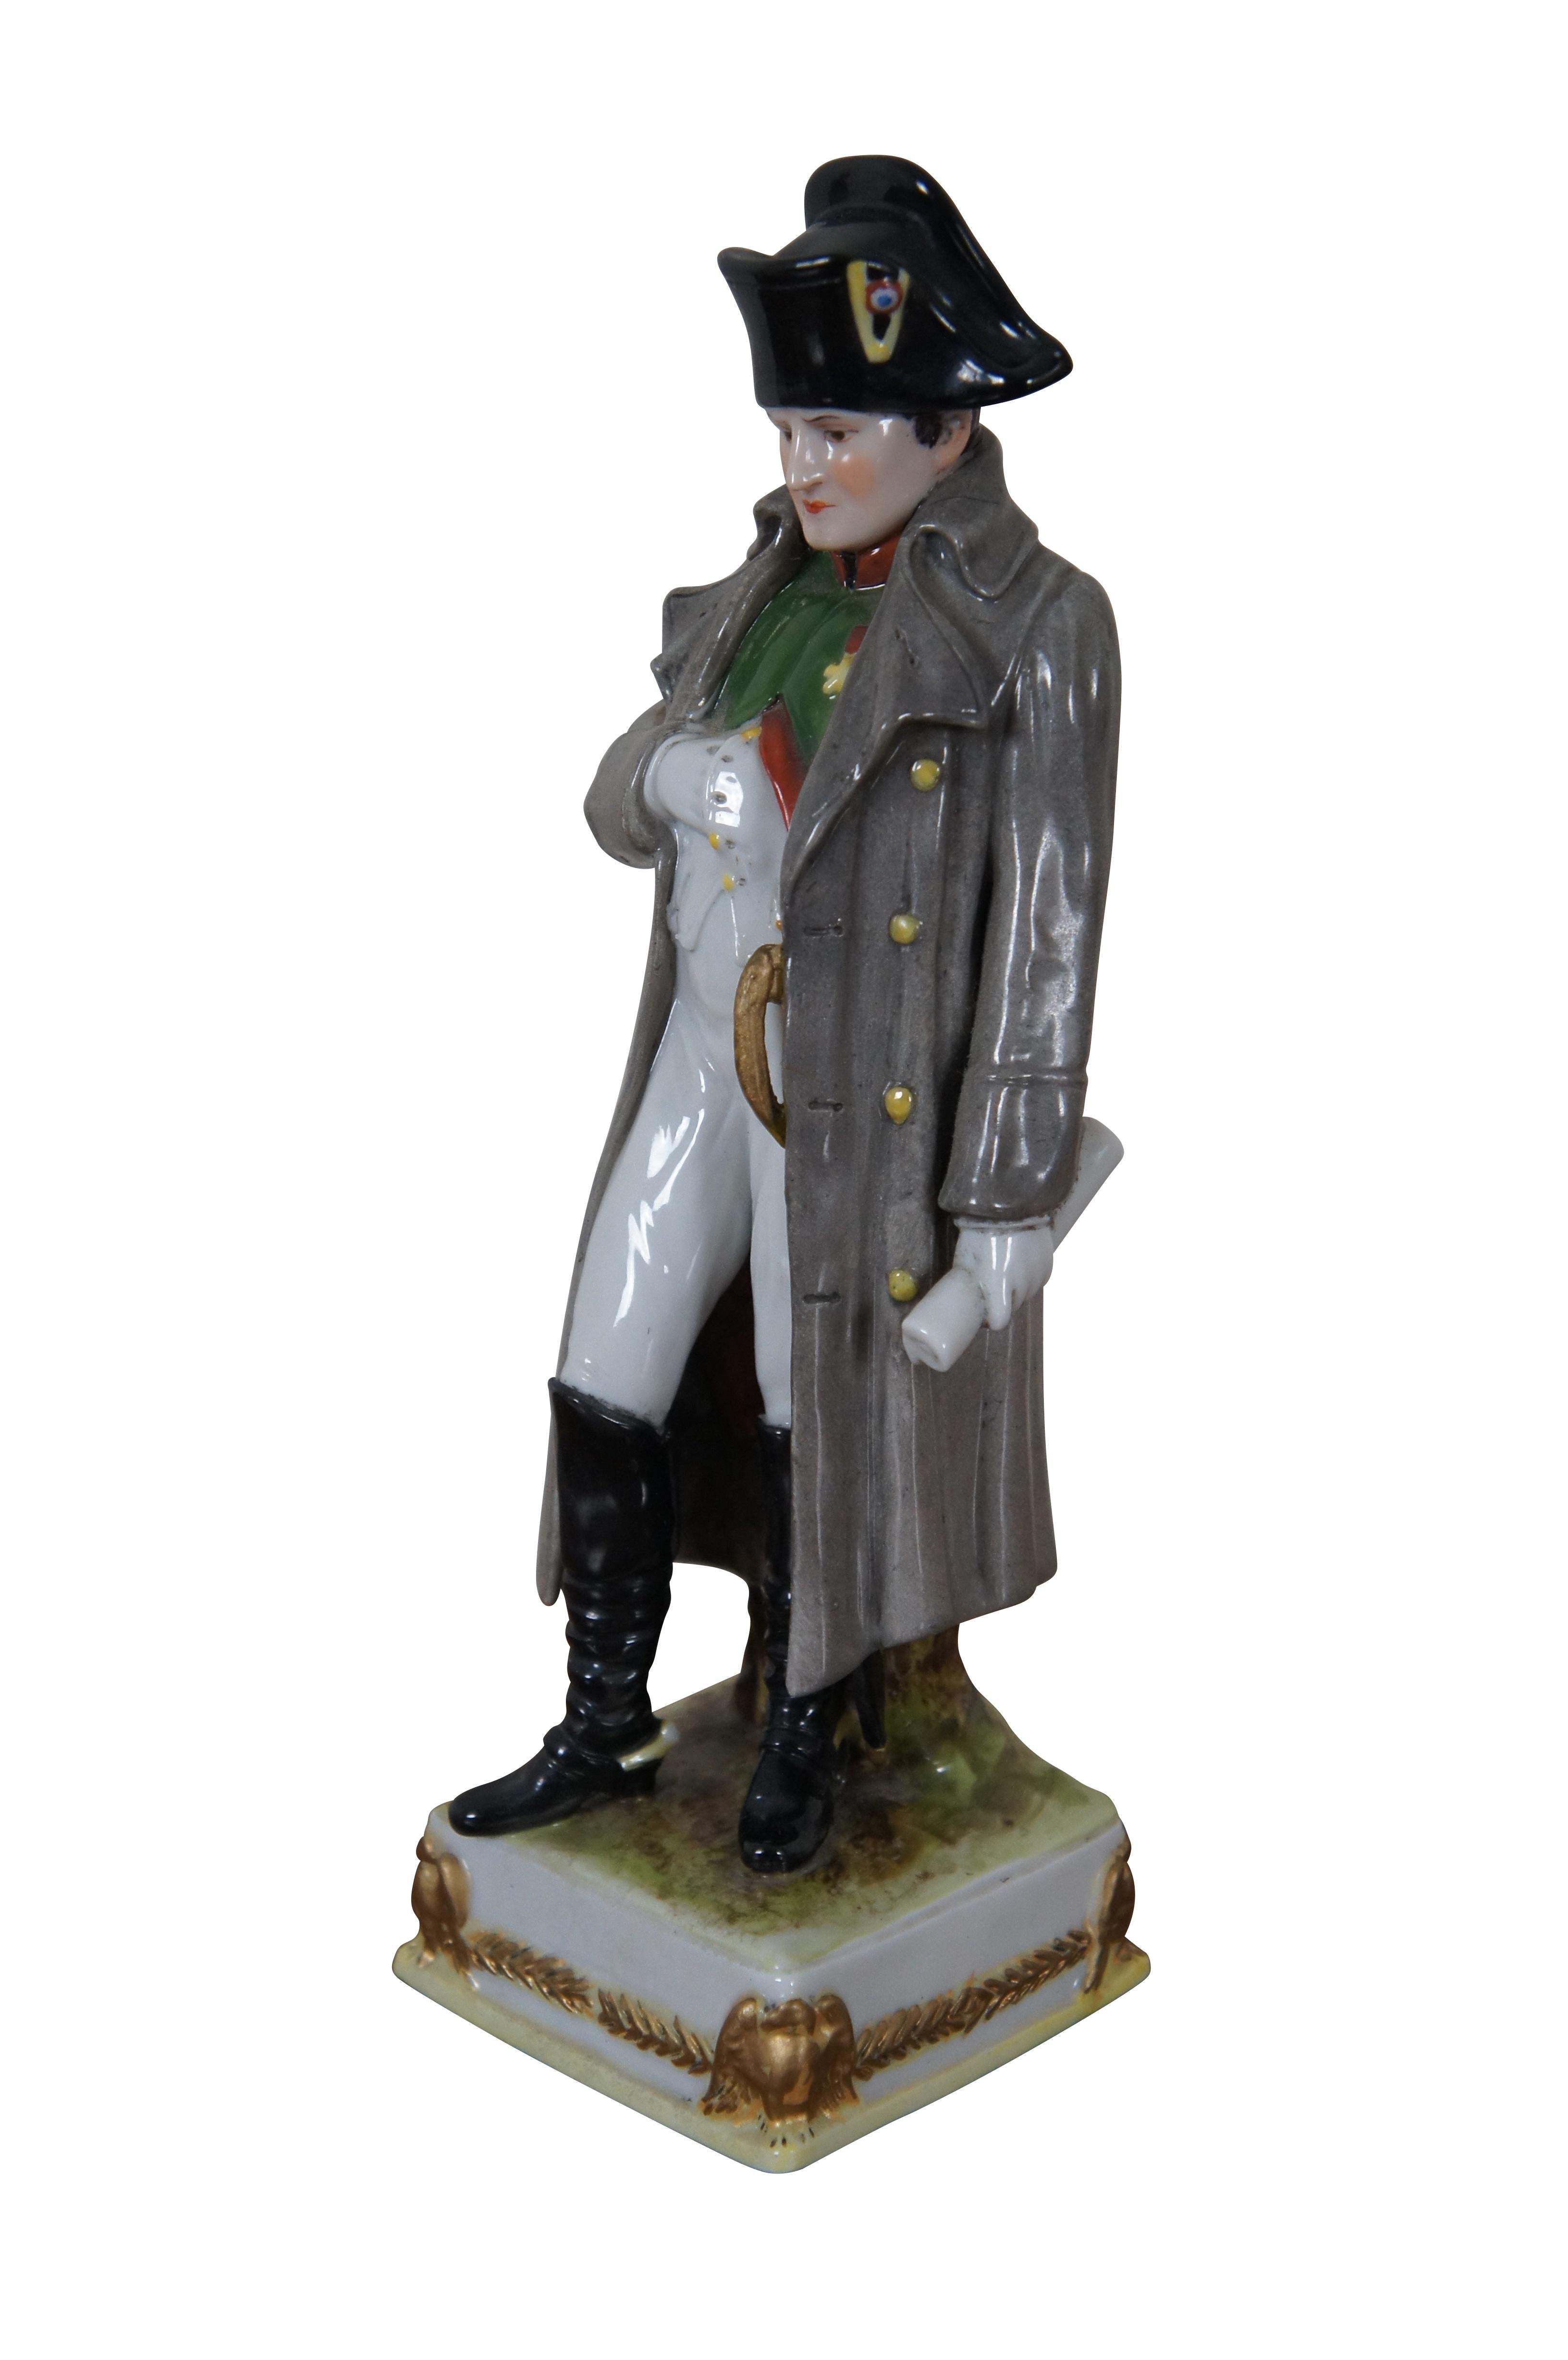 Antique German Scheibe-Alsbach / Sitzendorf / Kister porcelain figurine of General Napoleon Bonaparte wearing traditional attire with long overcoat, holding a scroll, standing on a gold eagle lined base.

Dimensions:
2.75” x 2.75” x 9” (Width x